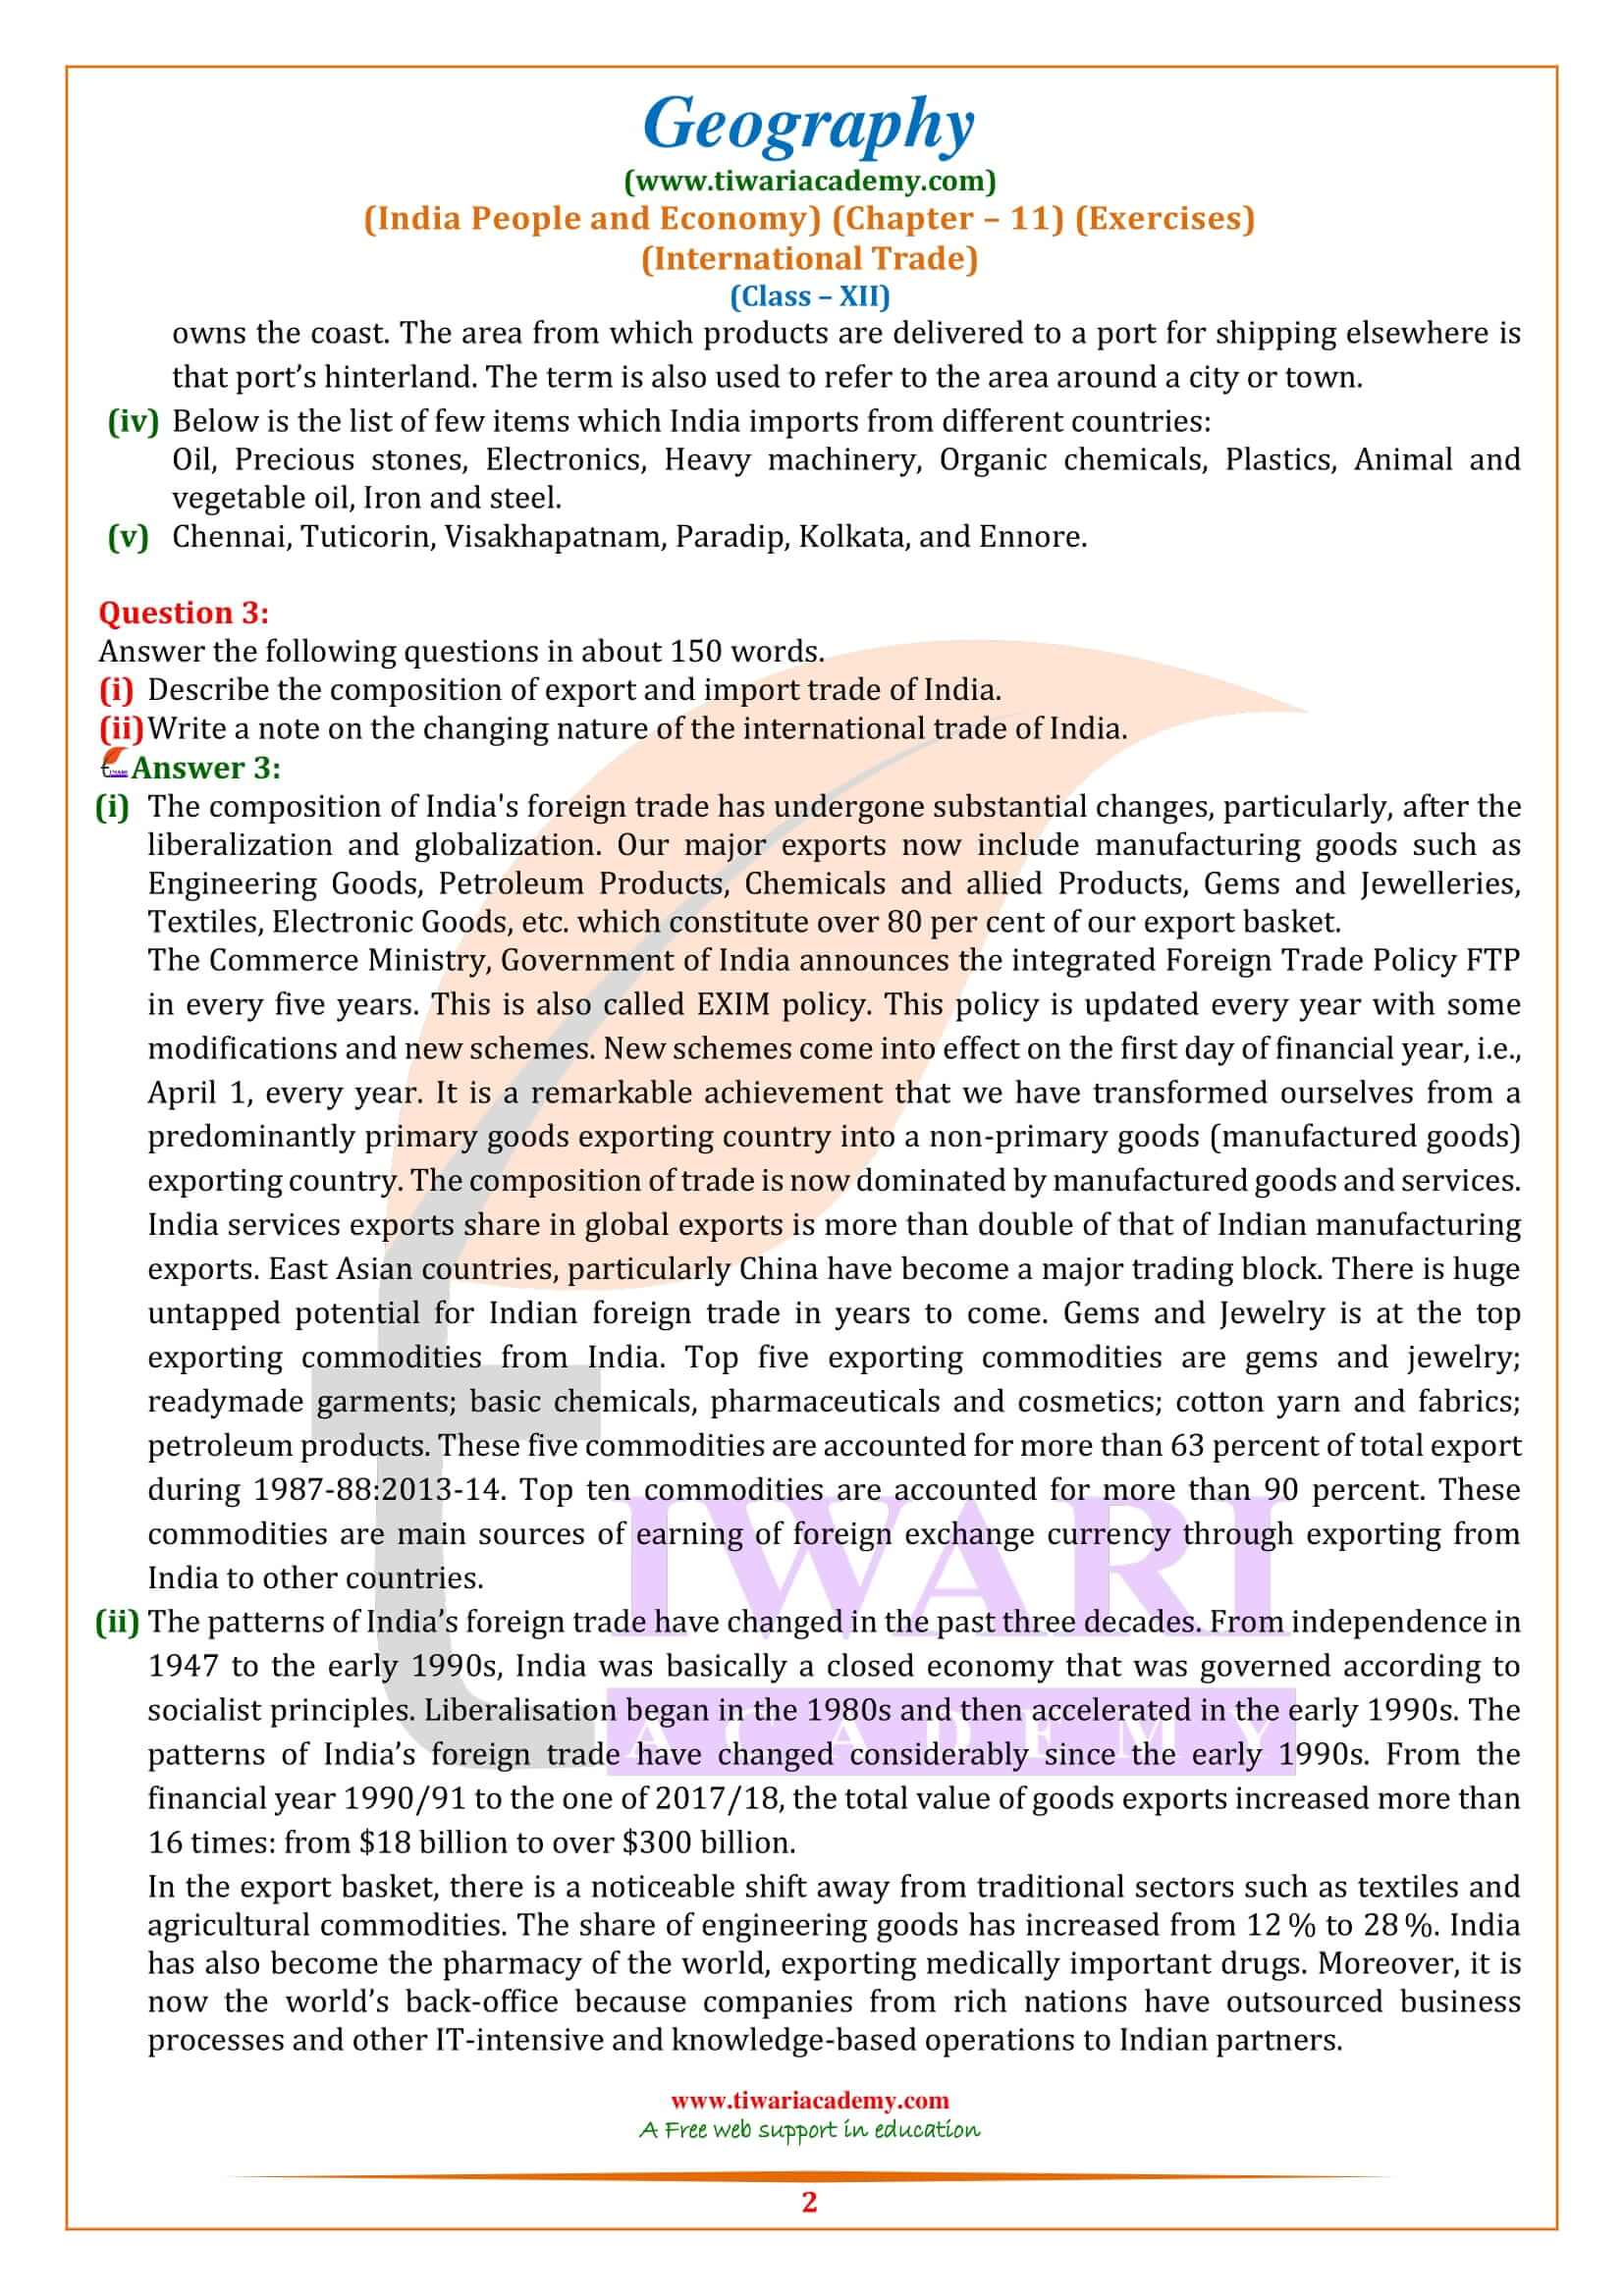 NCERT Solutions for Class 12 Geography Chapter 11 in English Medium